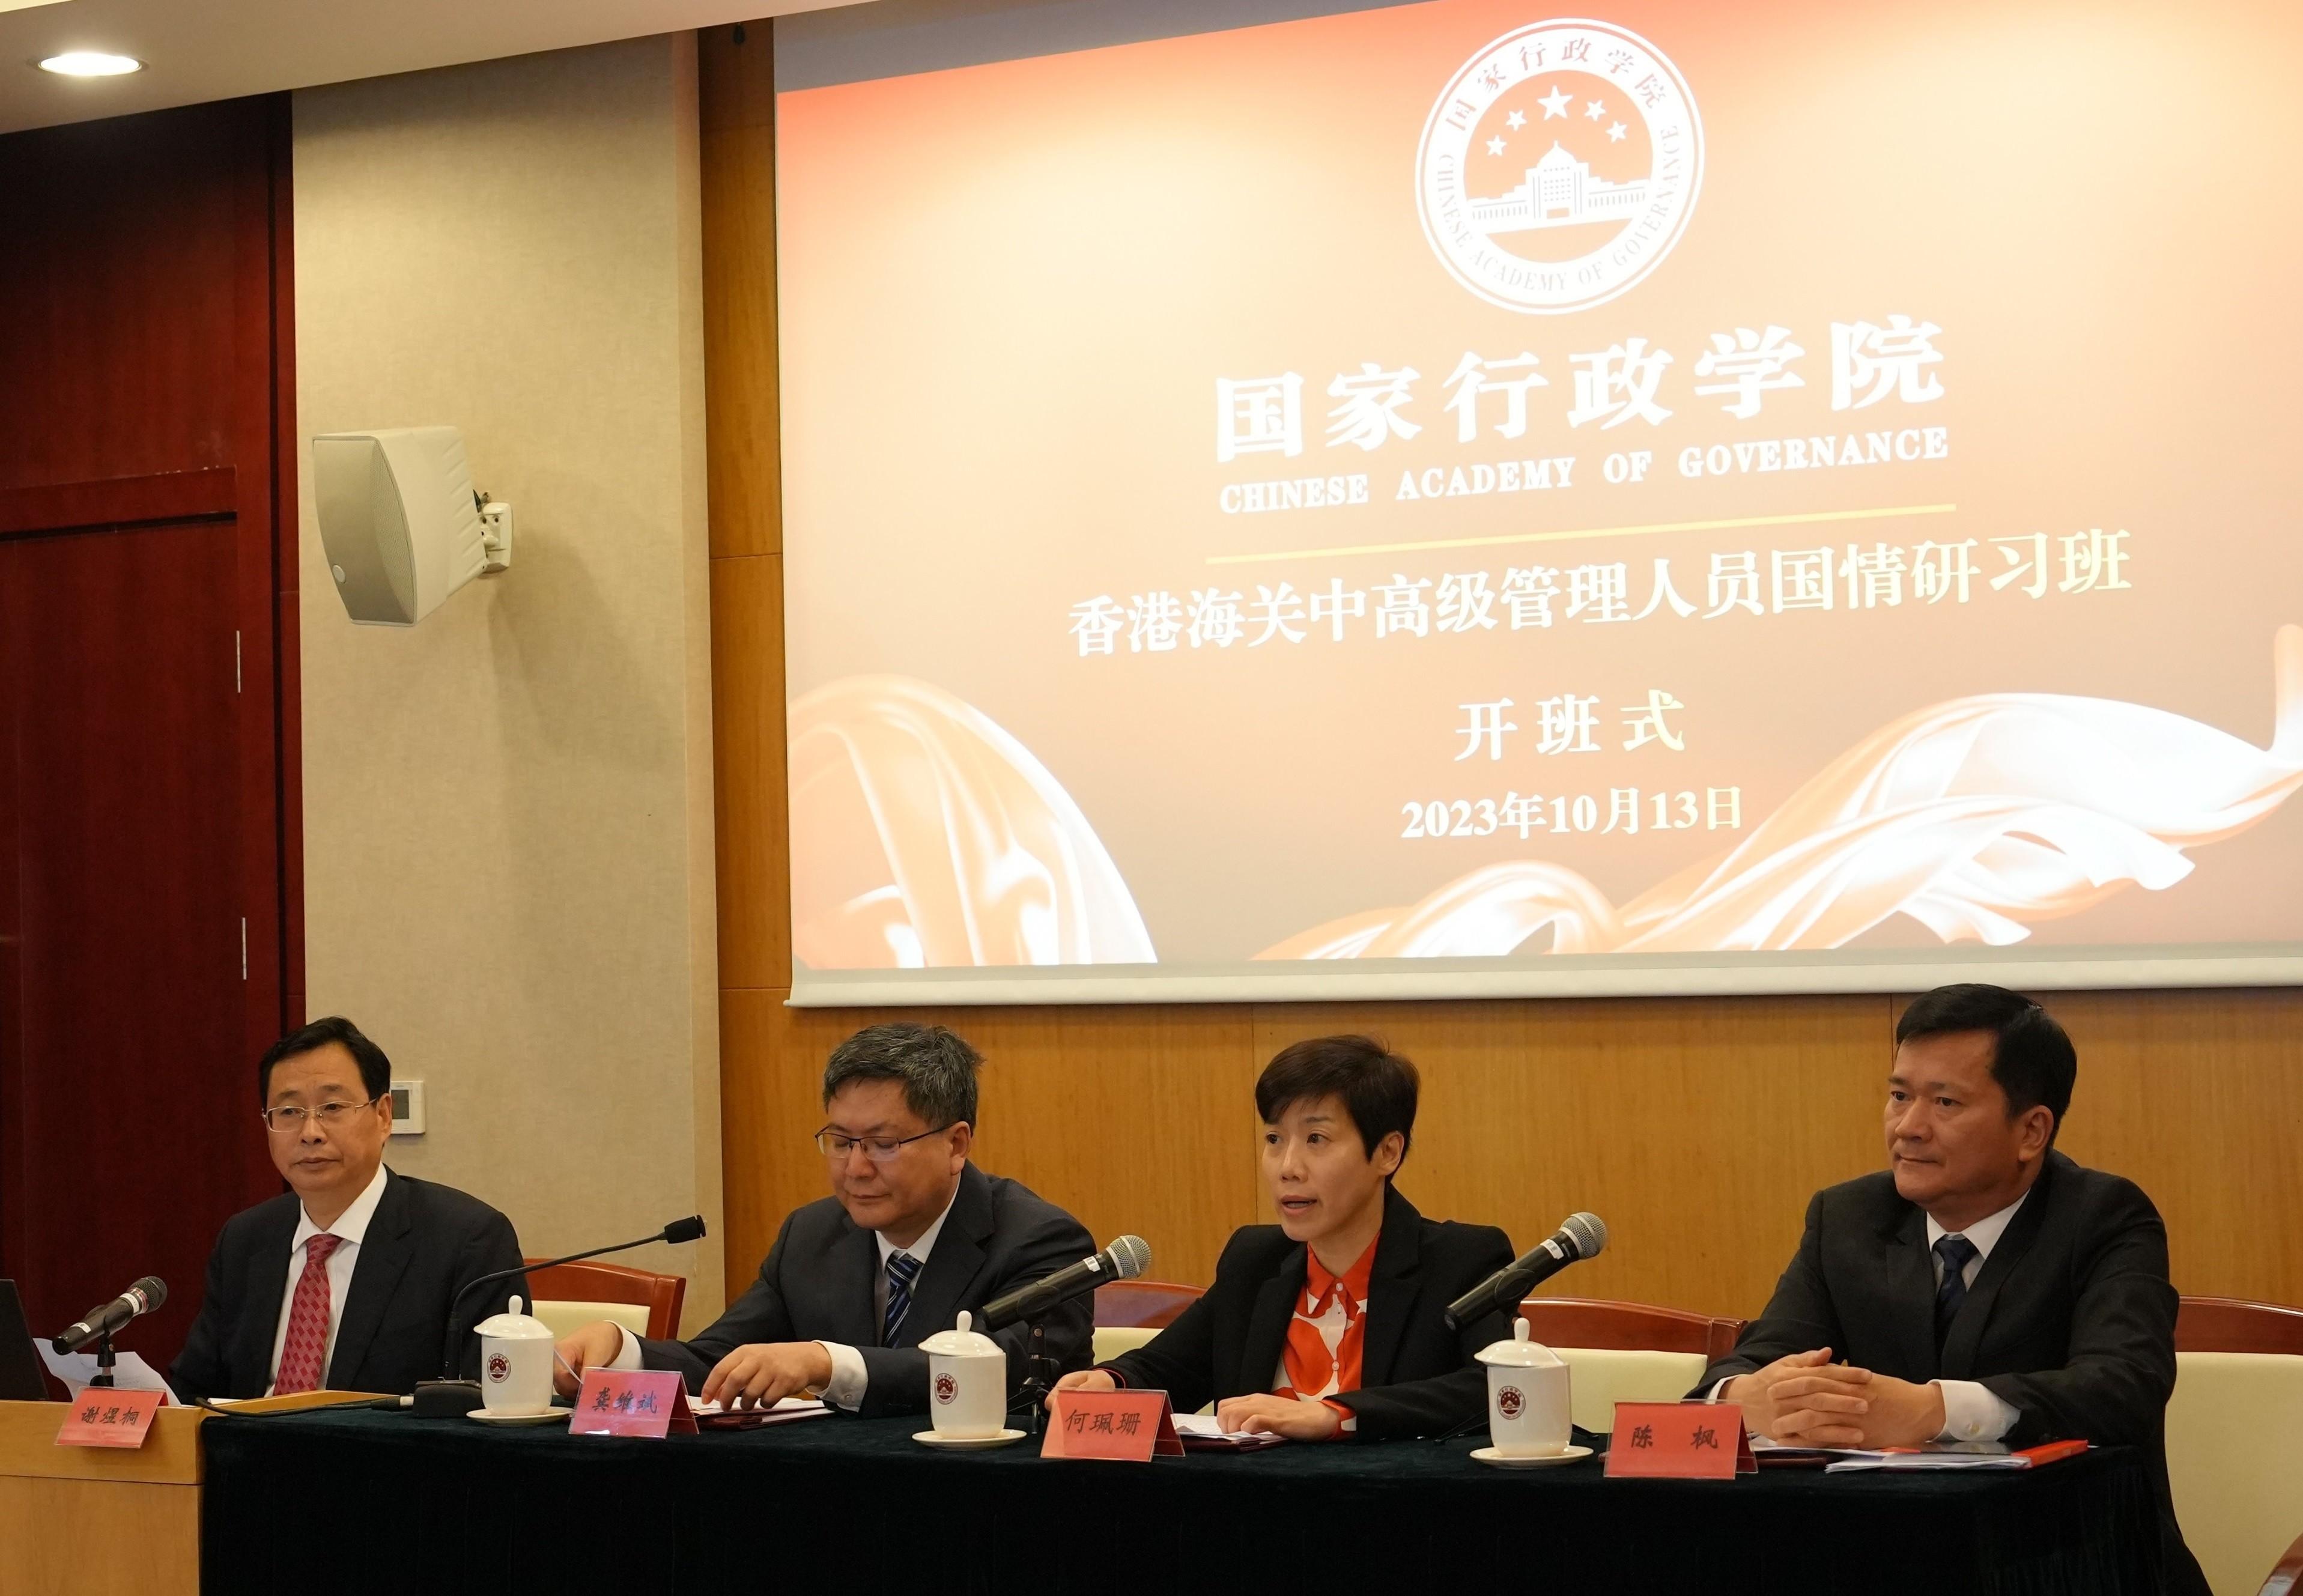 The Commissioner of Customs and Excise, Ms Louise Ho, today (October 13) attended the opening ceremony of the National Studies Course for Middle and Senior Managers of the Customs and Excise Department at the National Academy of Governance in Beijing. Photo shows Ms Ho (second right) delivering a speech at the ceremony.